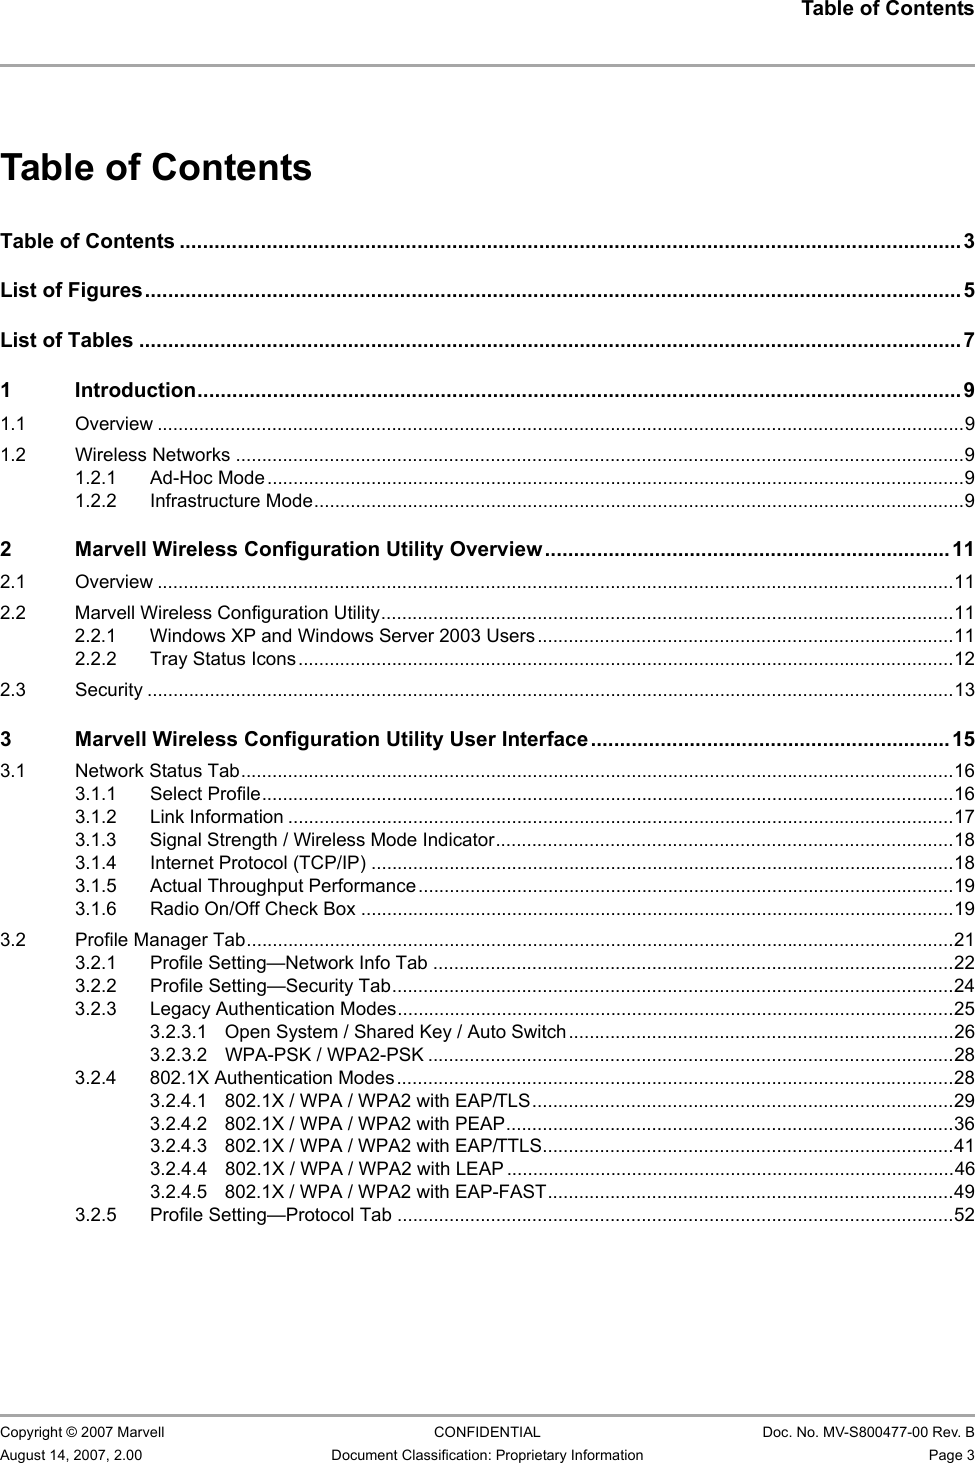 Table of Contents                         Copyright © 2007 Marvell CONFIDENTIAL Doc. No. MV-S800477-00 Rev. BAugust 14, 2007, 2.00 Document Classification: Proprietary Information Page 3 Table of ContentsTable of Contents .......................................................................................................................................3List of Figures............................................................................................................................................. 5List of Tables .............................................................................................................................................. 71 Introduction....................................................................................................................................91.1 Overview ...........................................................................................................................................................91.2 Wireless Networks ............................................................................................................................................91.2.1 Ad-Hoc Mode......................................................................................................................................91.2.2 Infrastructure Mode.............................................................................................................................92 Marvell Wireless Configuration Utility Overview...................................................................... 112.1 Overview .........................................................................................................................................................112.2 Marvell Wireless Configuration Utility..............................................................................................................112.2.1 Windows XP and Windows Server 2003 Users ................................................................................112.2.2 Tray Status Icons..............................................................................................................................122.3 Security ...........................................................................................................................................................133 Marvell Wireless Configuration Utility User Interface..............................................................153.1 Network Status Tab.........................................................................................................................................163.1.1 Select Profile.....................................................................................................................................163.1.2 Link Information ................................................................................................................................173.1.3 Signal Strength / Wireless Mode Indicator........................................................................................183.1.4 Internet Protocol (TCP/IP) ................................................................................................................183.1.5 Actual Throughput Performance.......................................................................................................193.1.6 Radio On/Off Check Box ..................................................................................................................193.2 Profile Manager Tab........................................................................................................................................213.2.1 Profile Setting—Network Info Tab ....................................................................................................223.2.2 Profile Setting—Security Tab............................................................................................................243.2.3 Legacy Authentication Modes...........................................................................................................253.2.3.1 Open System / Shared Key / Auto Switch..........................................................................263.2.3.2 WPA-PSK / WPA2-PSK .....................................................................................................283.2.4 802.1X Authentication Modes ...........................................................................................................283.2.4.1 802.1X / WPA / WPA2 with EAP/TLS.................................................................................293.2.4.2 802.1X / WPA / WPA2 with PEAP......................................................................................363.2.4.3 802.1X / WPA / WPA2 with EAP/TTLS...............................................................................413.2.4.4 802.1X / WPA / WPA2 with LEAP ......................................................................................463.2.4.5 802.1X / WPA / WPA2 with EAP-FAST..............................................................................493.2.5 Profile Setting—Protocol Tab ...........................................................................................................52